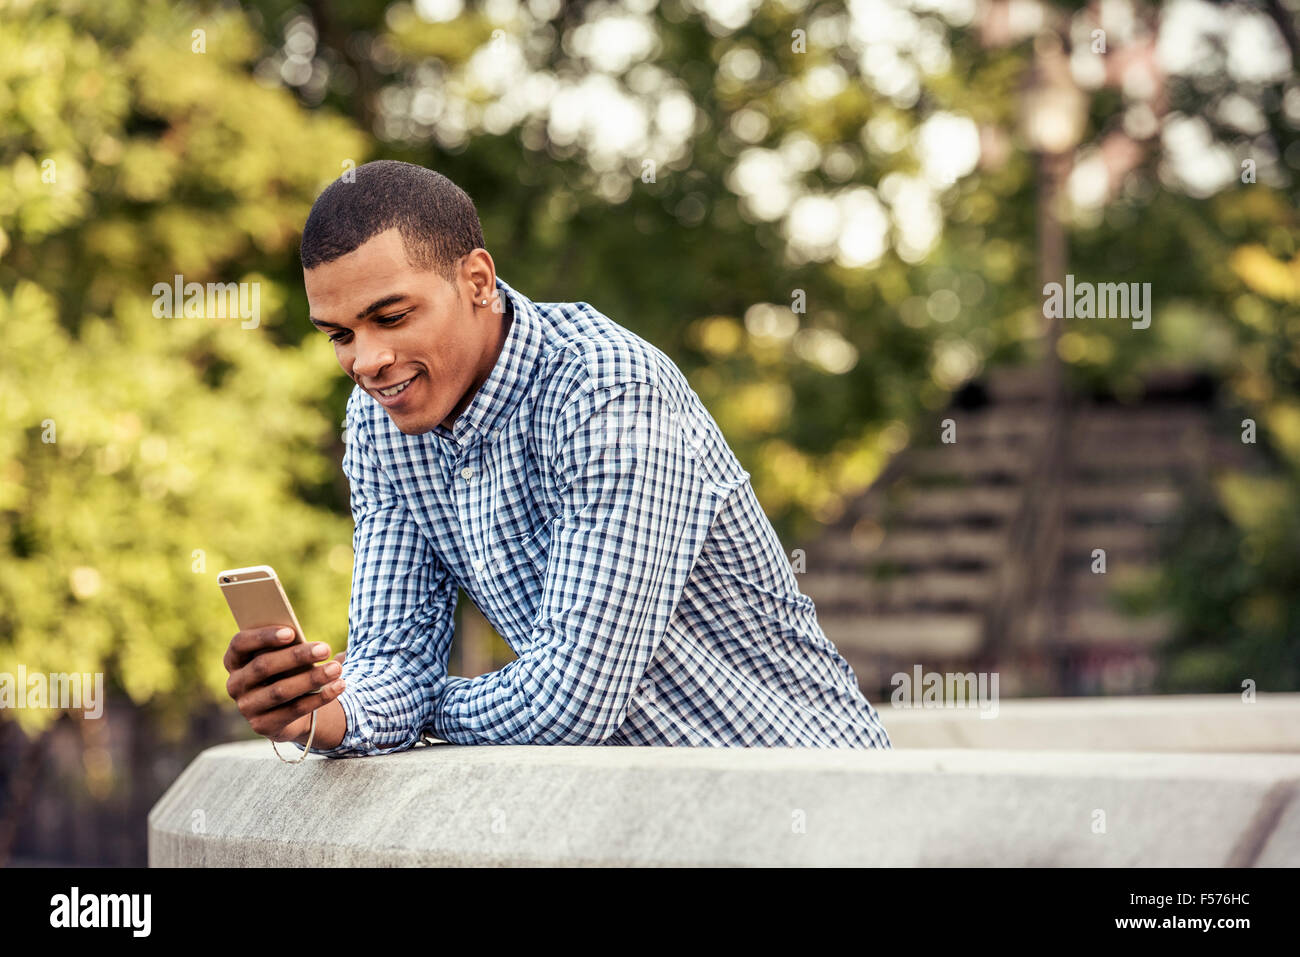 A man leaning on a parapet looking at a smart phone Stock Photo